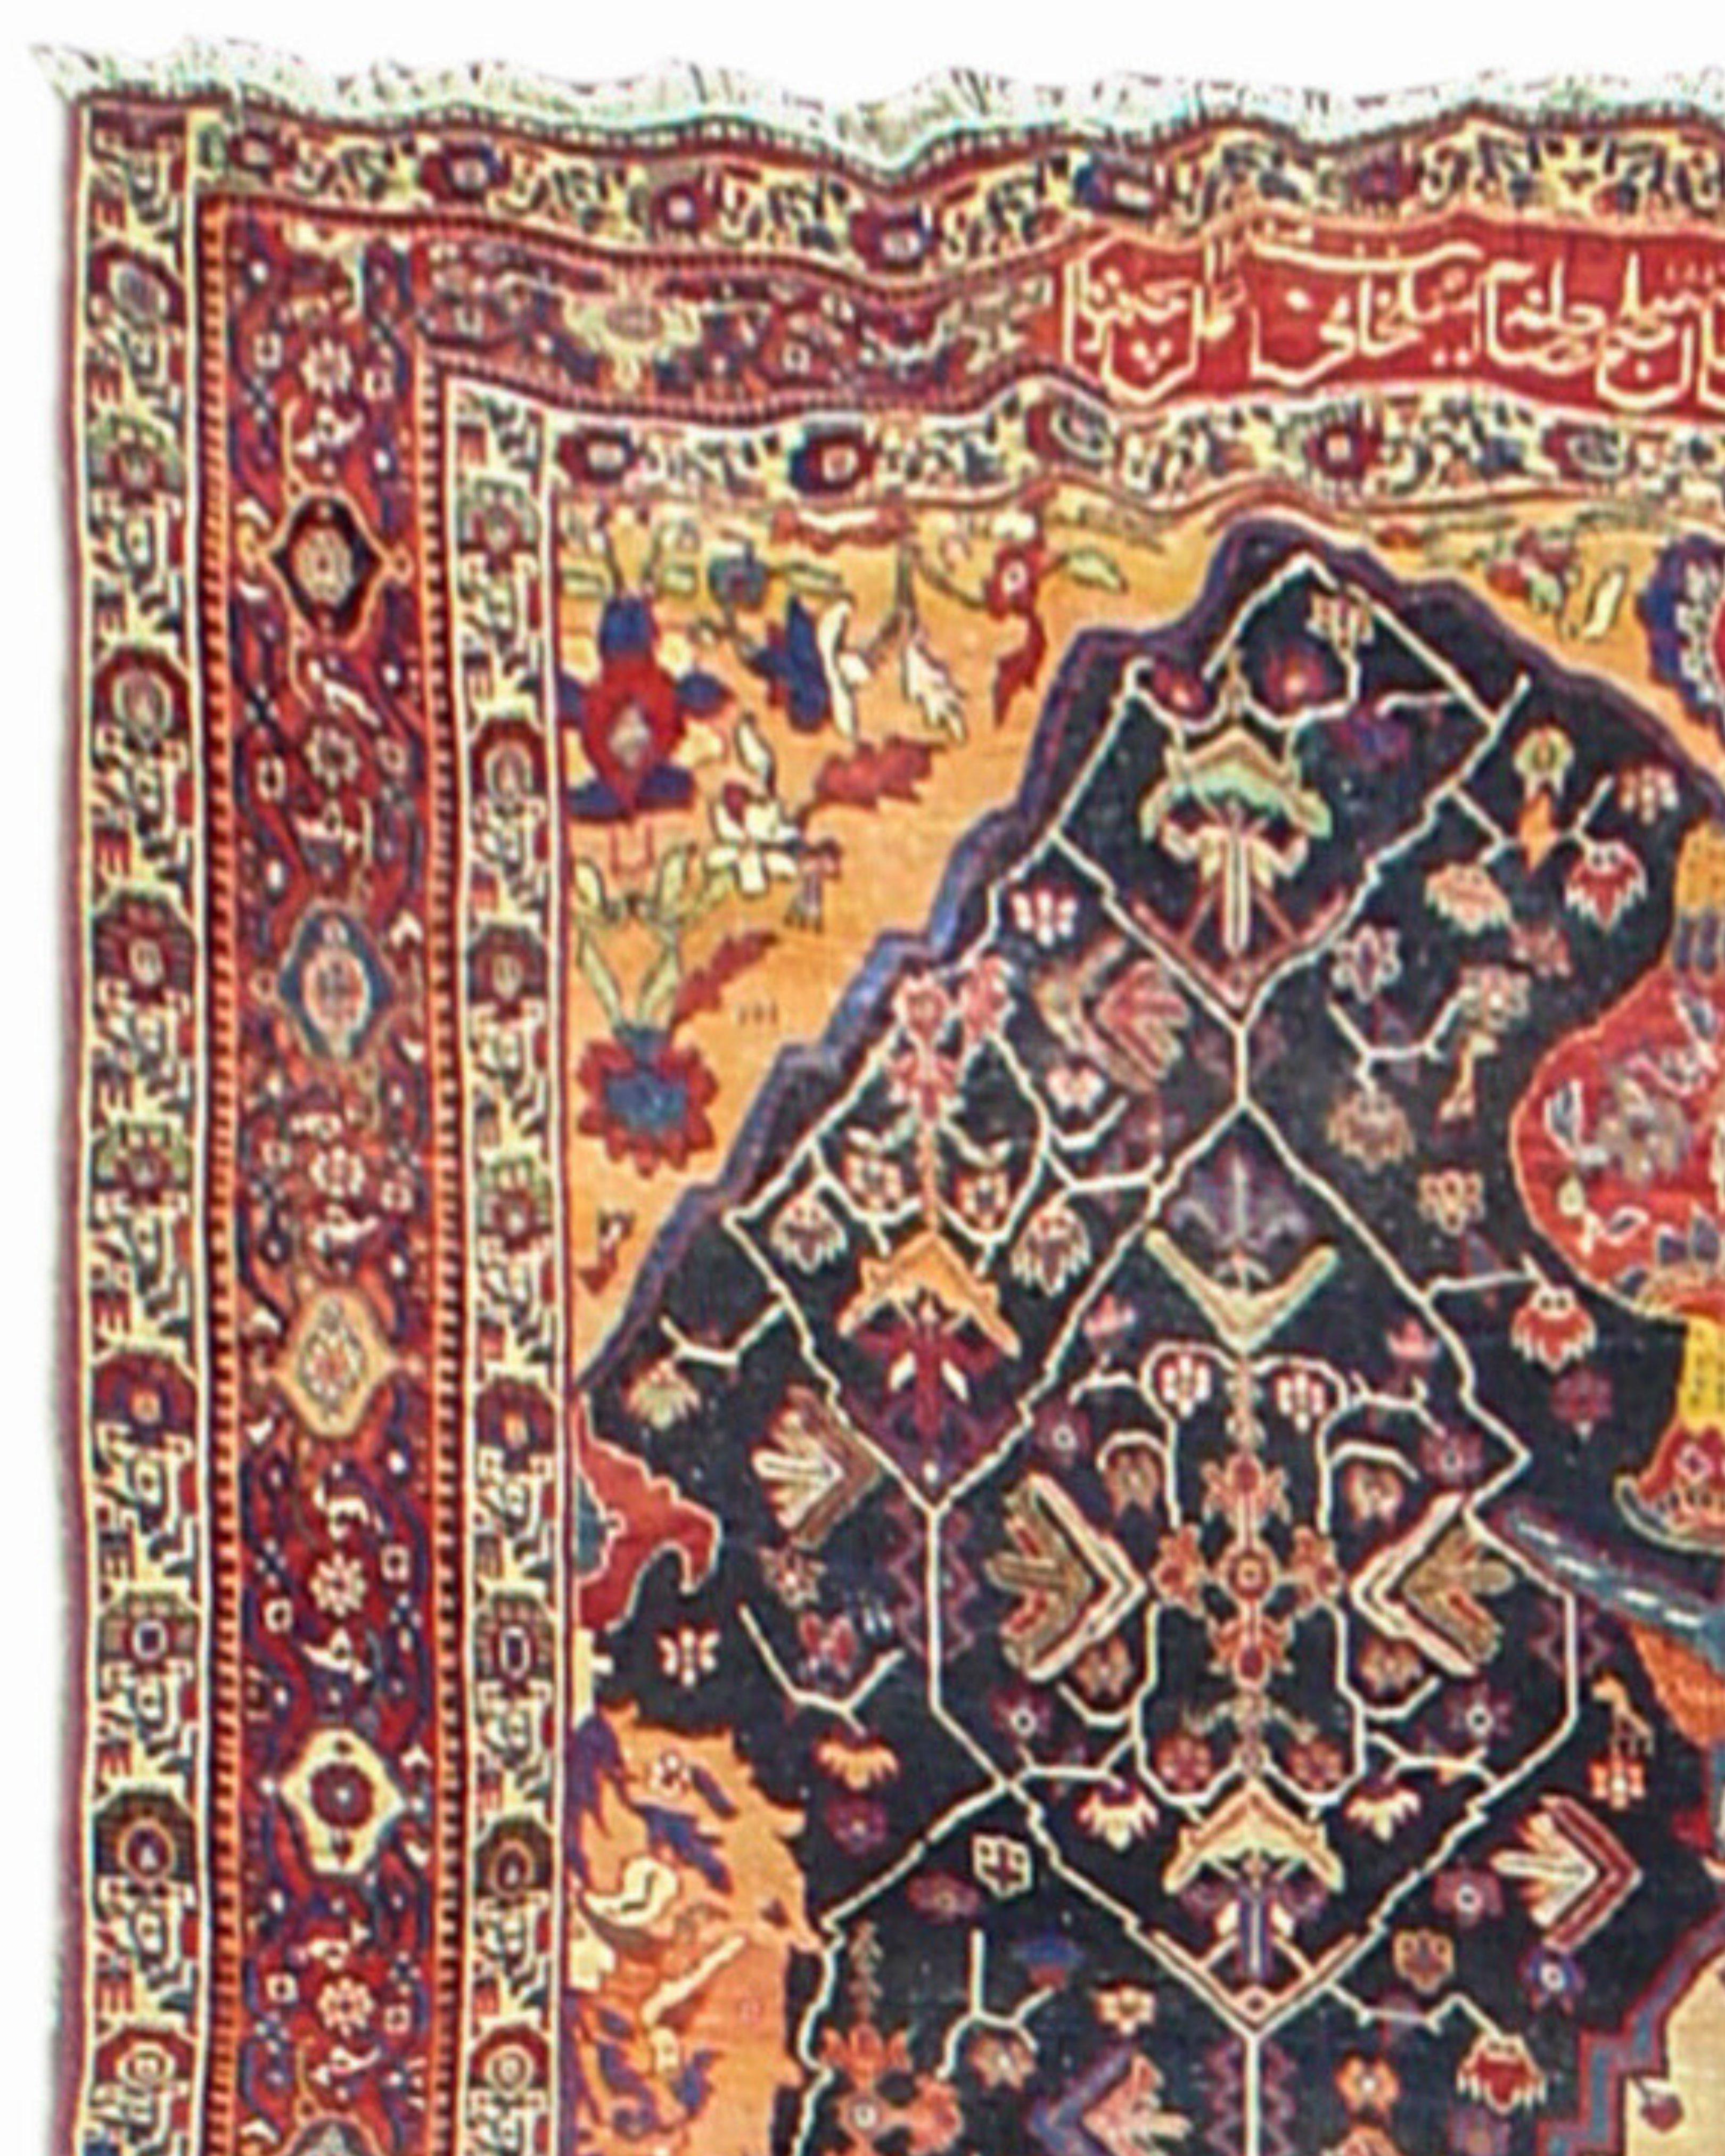 Hand-Knotted Antique Persian Bakhtiari Carpet Rug, Early 20th Century For Sale